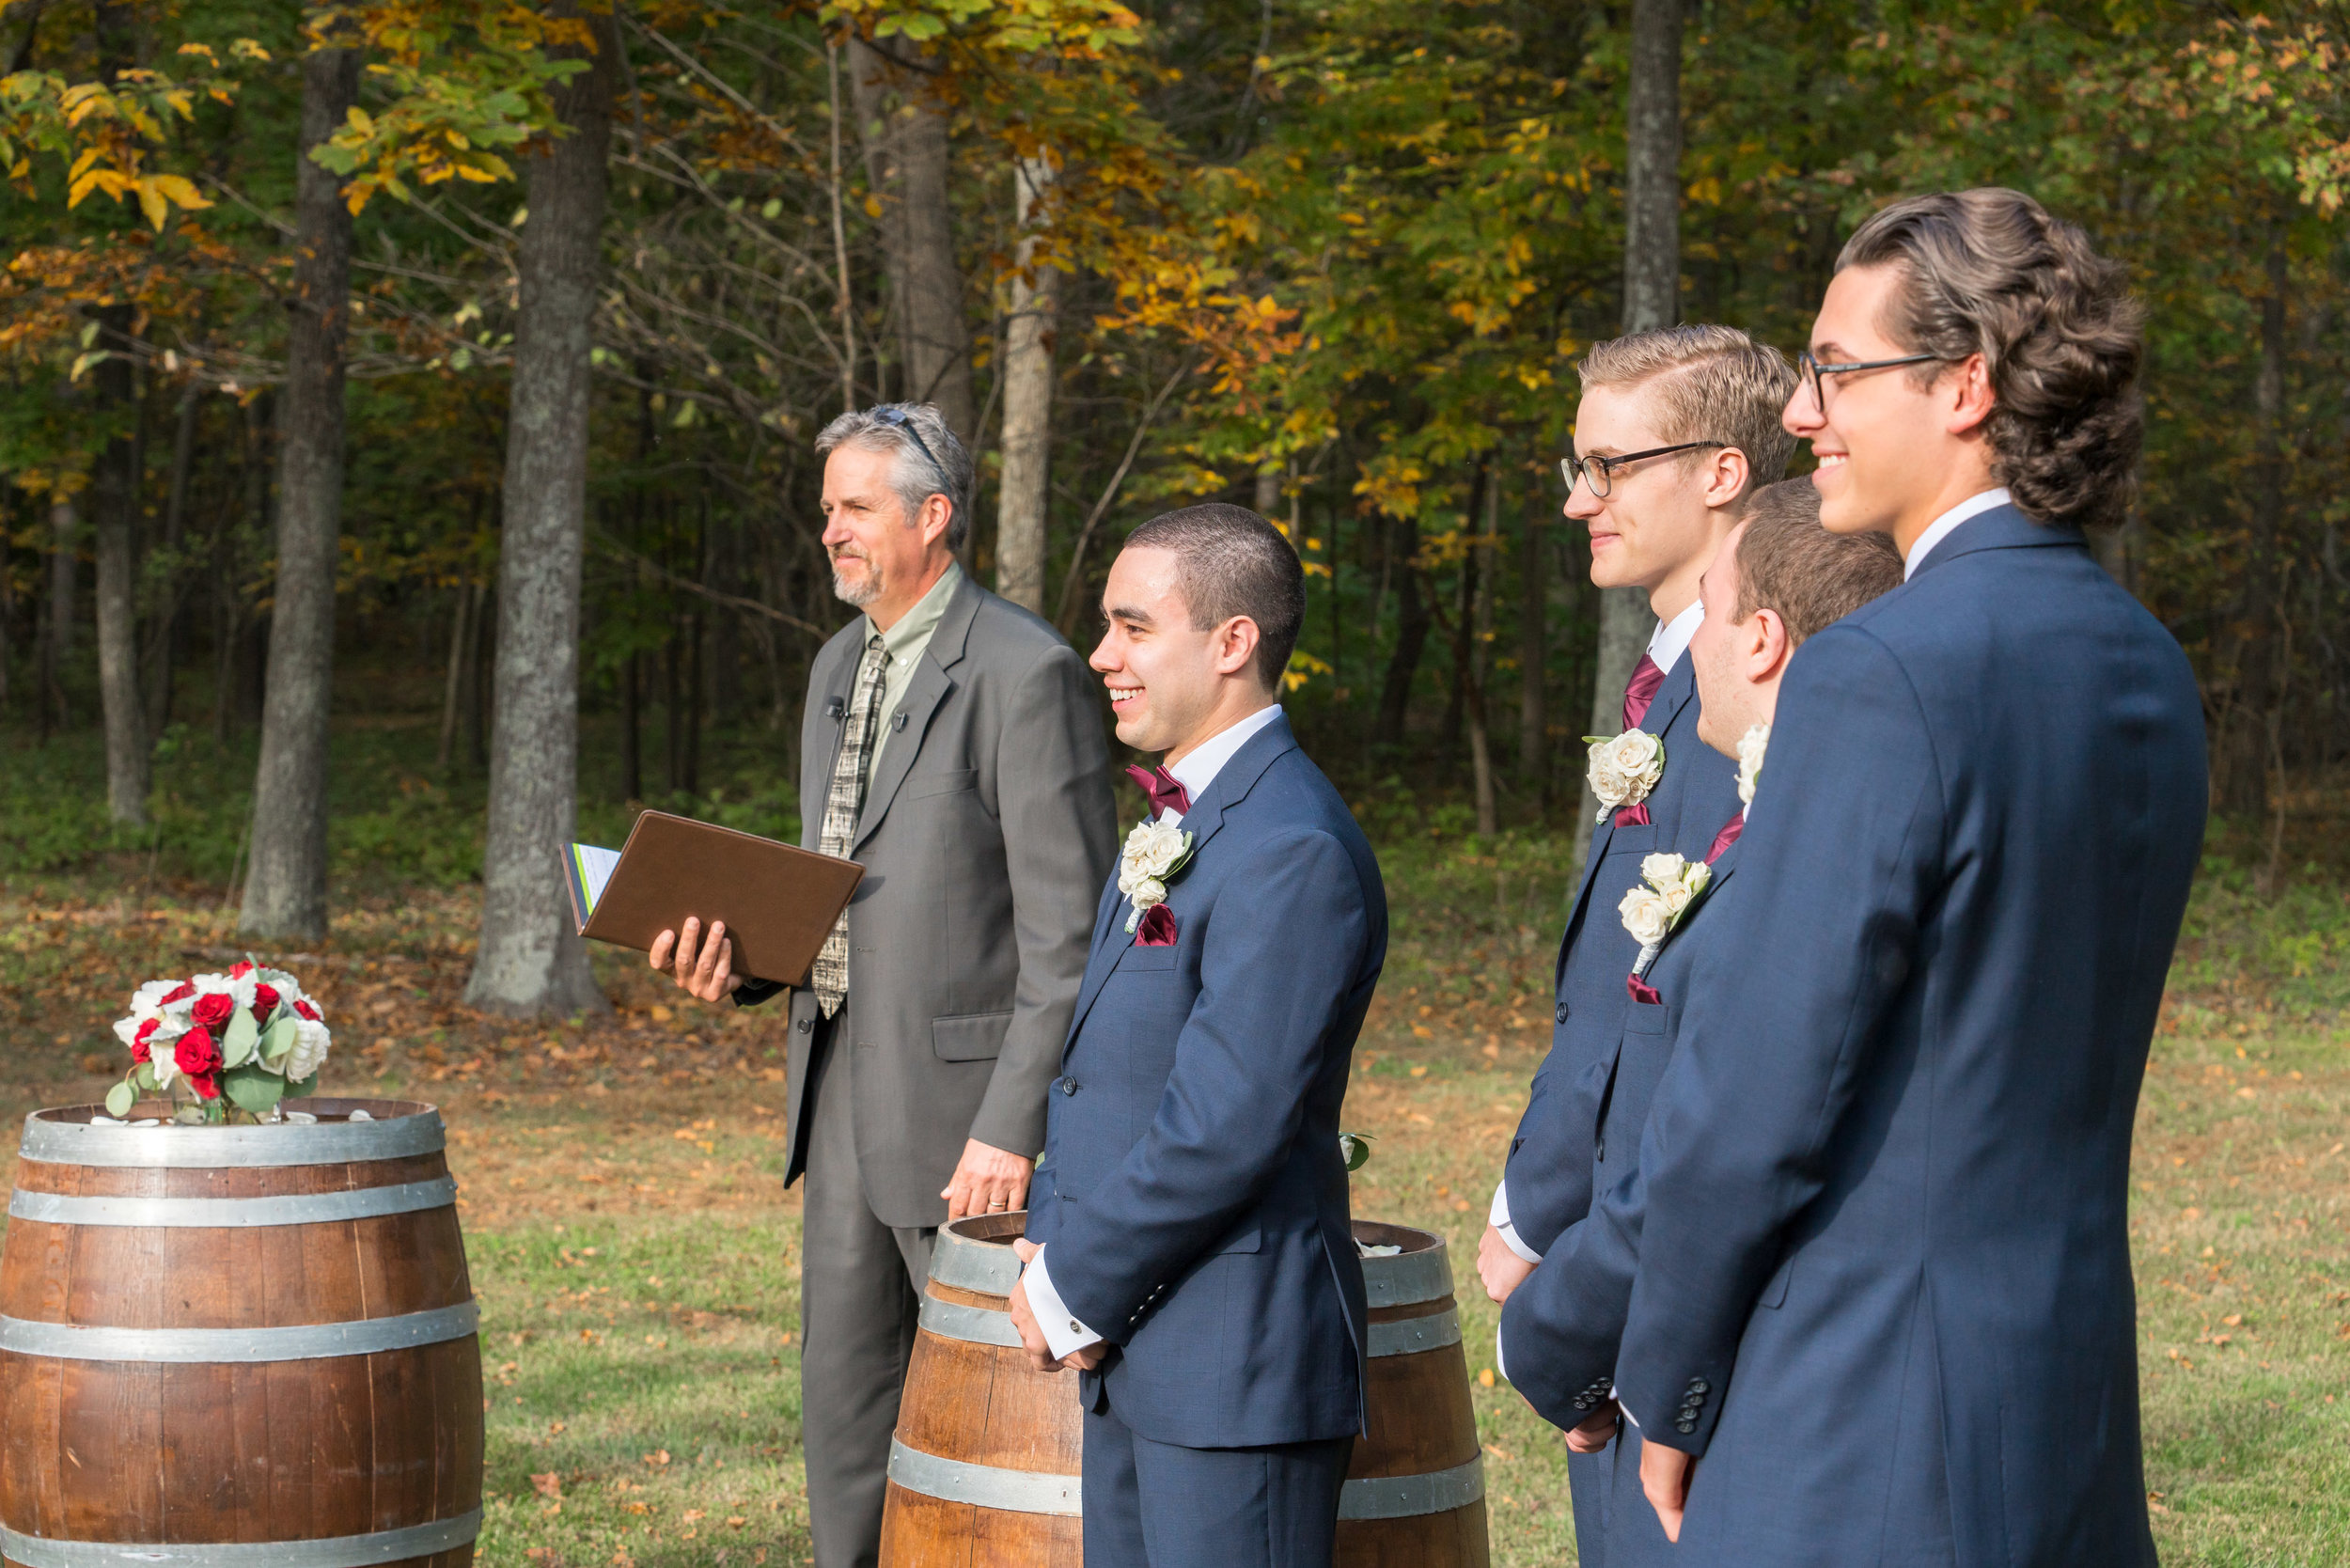 Groom at outdoor wedding ceremony at Lost Creek Winery